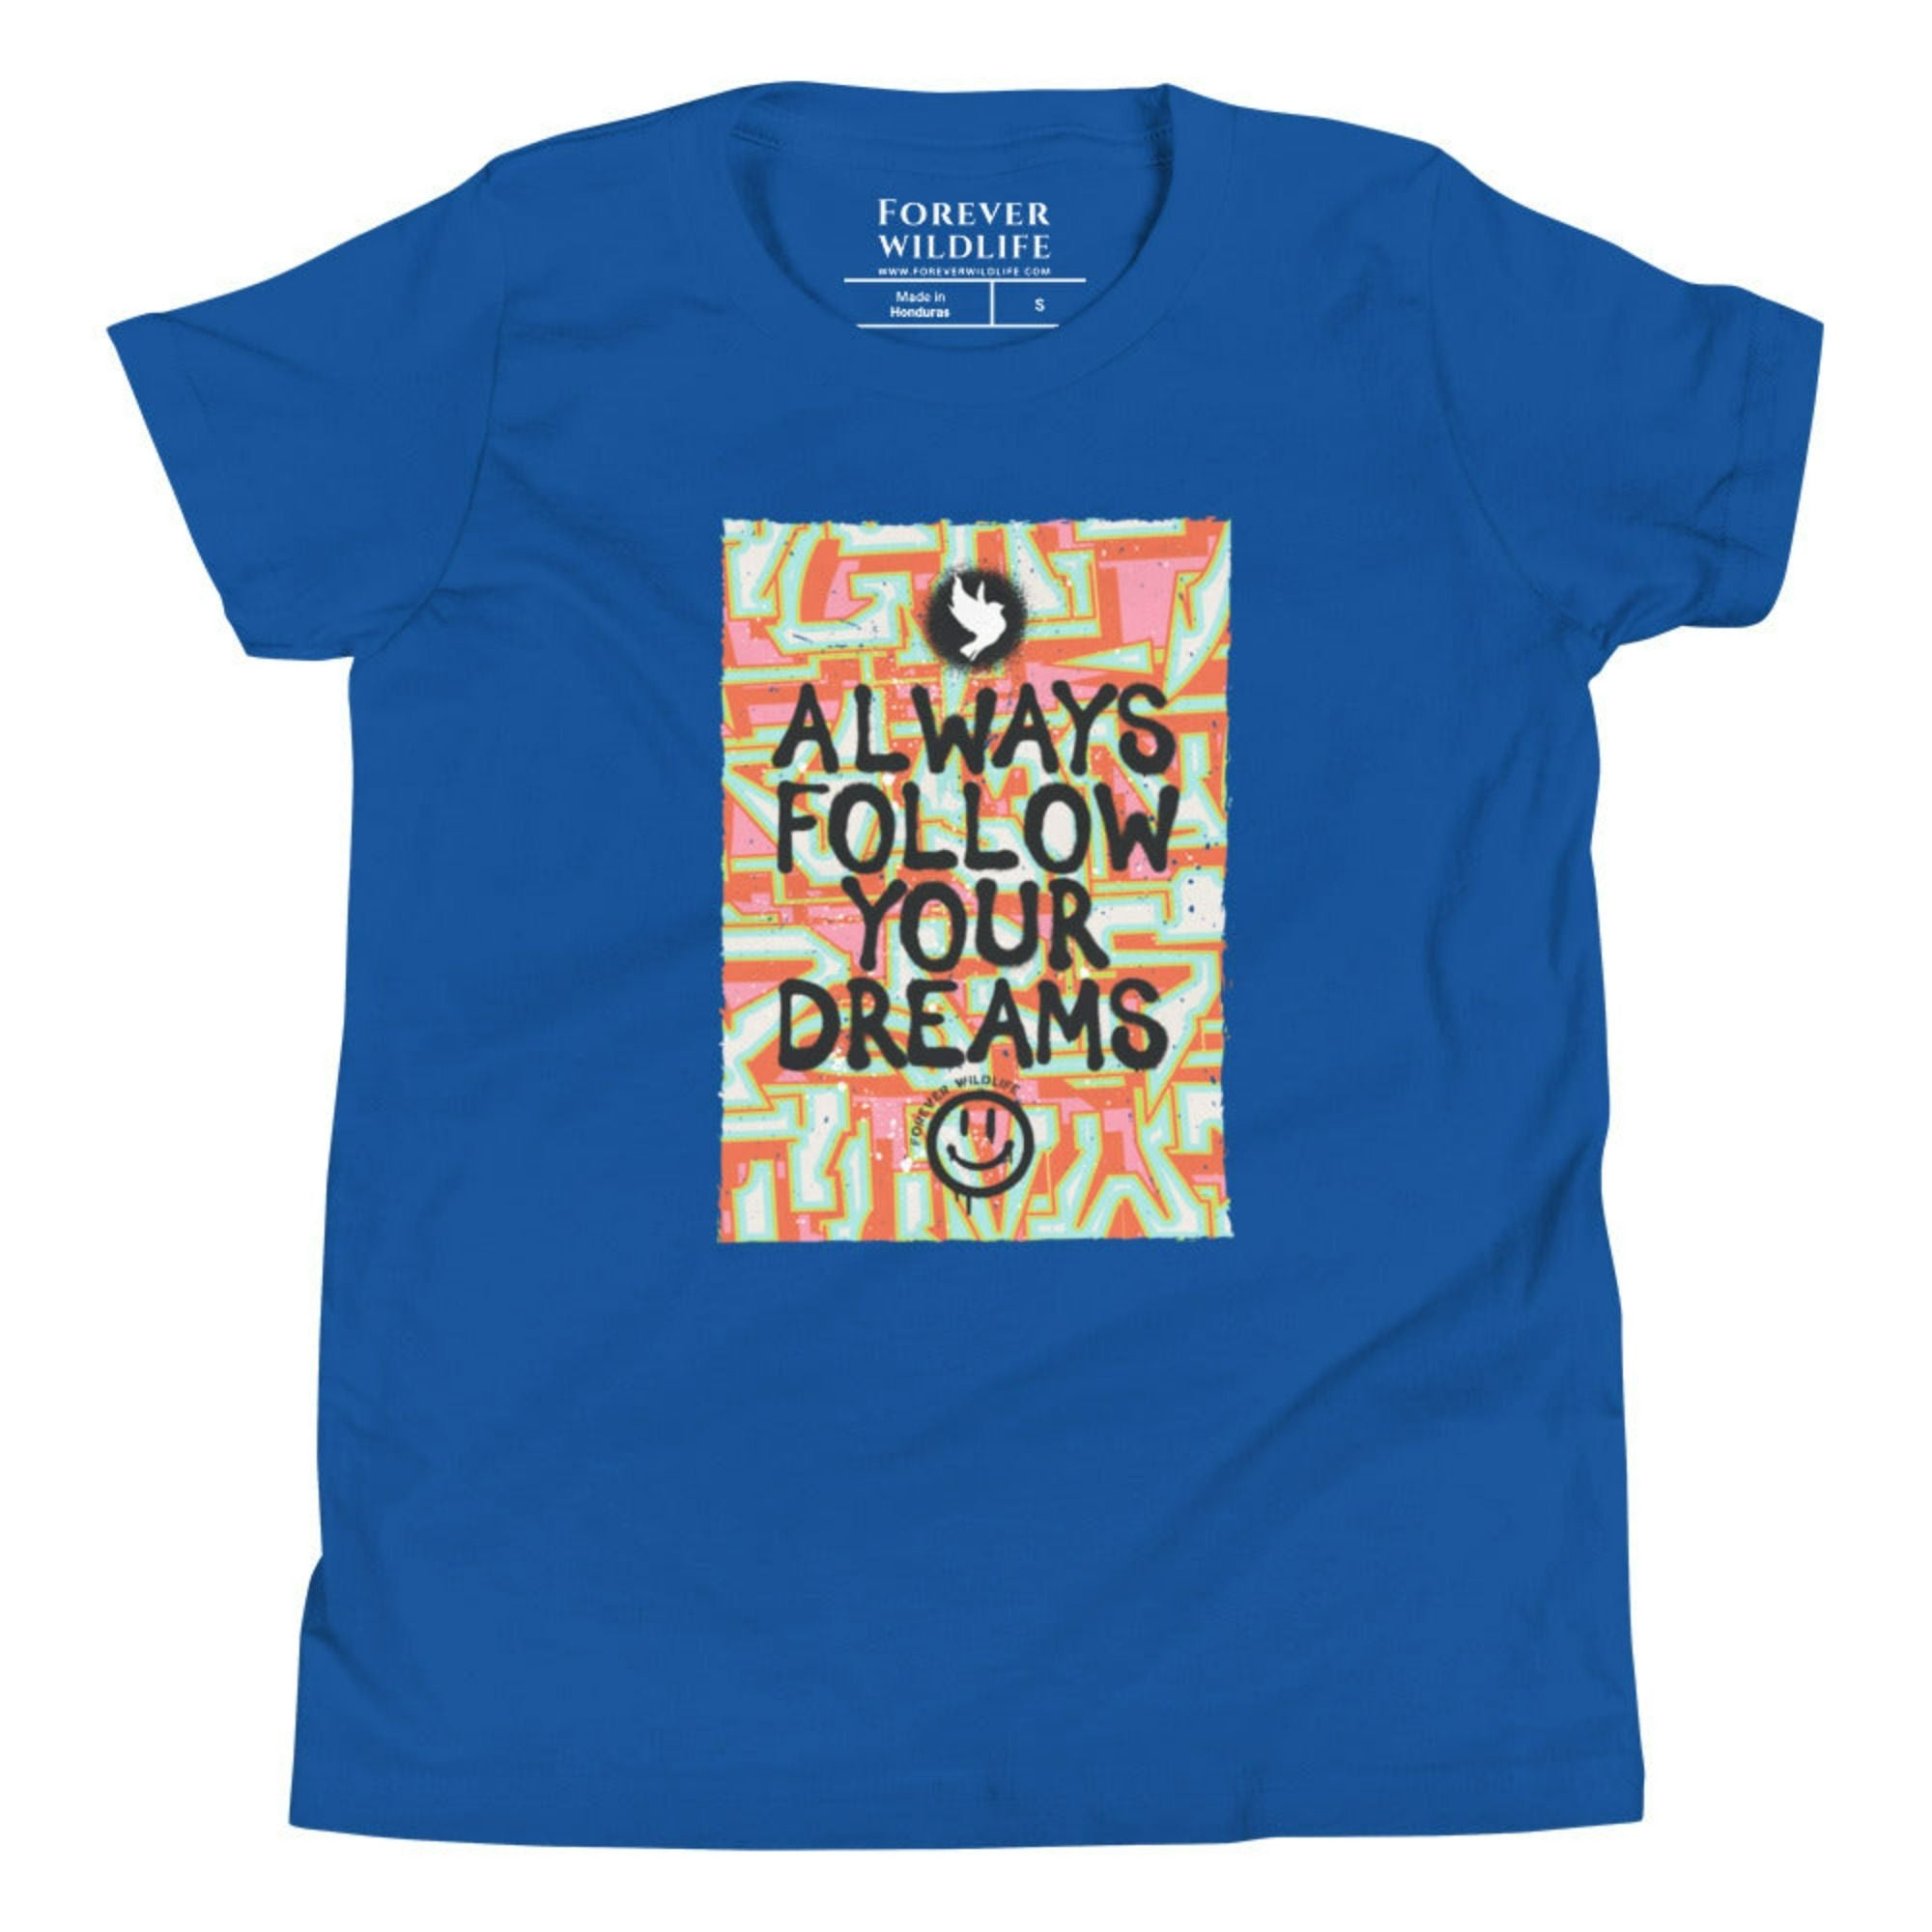 ALWAYS FOLLOW YOUR DREAMS DOVE YOUTH T-SHIRT